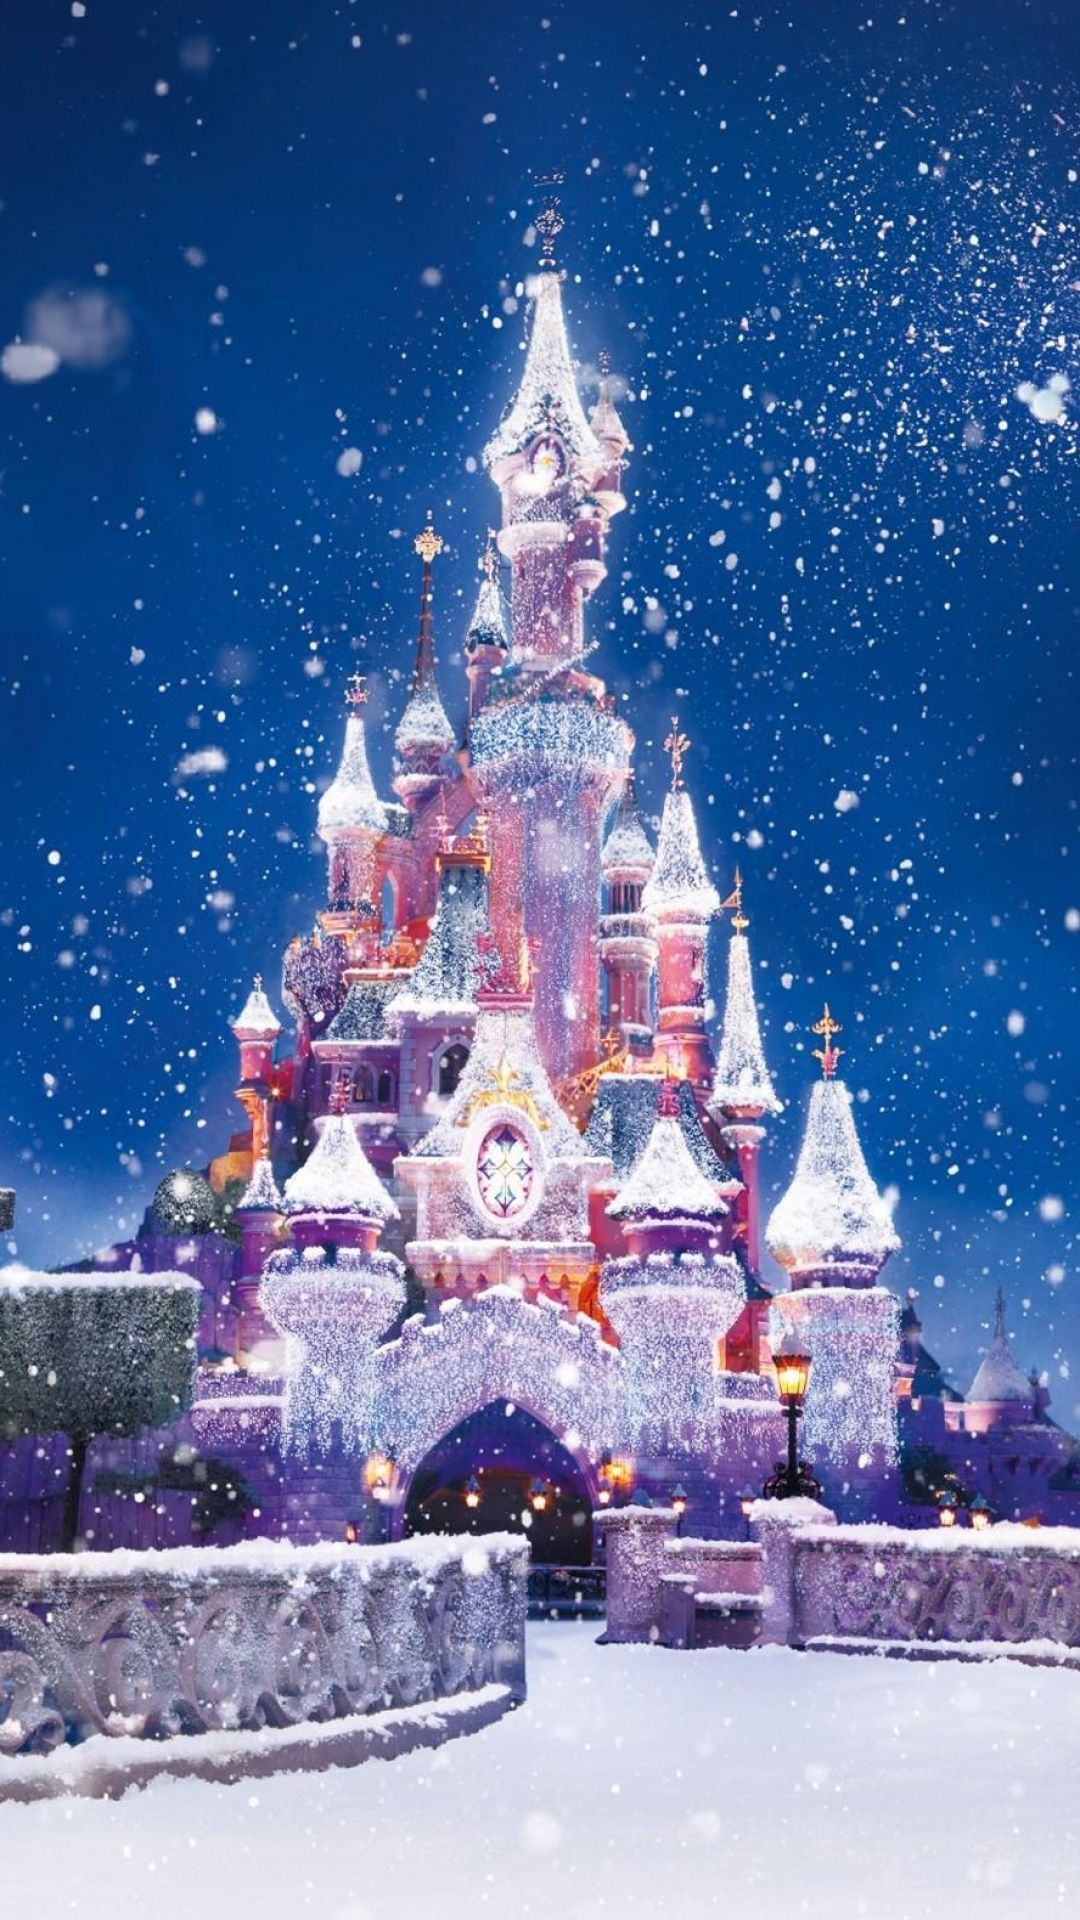 Holiday #Disney Castle Christmas Lights Snow Android Wallpaper #wallpaper HD 4k background for android :). Disney achtergrond, Kerstachtergrond, Disney kastelen